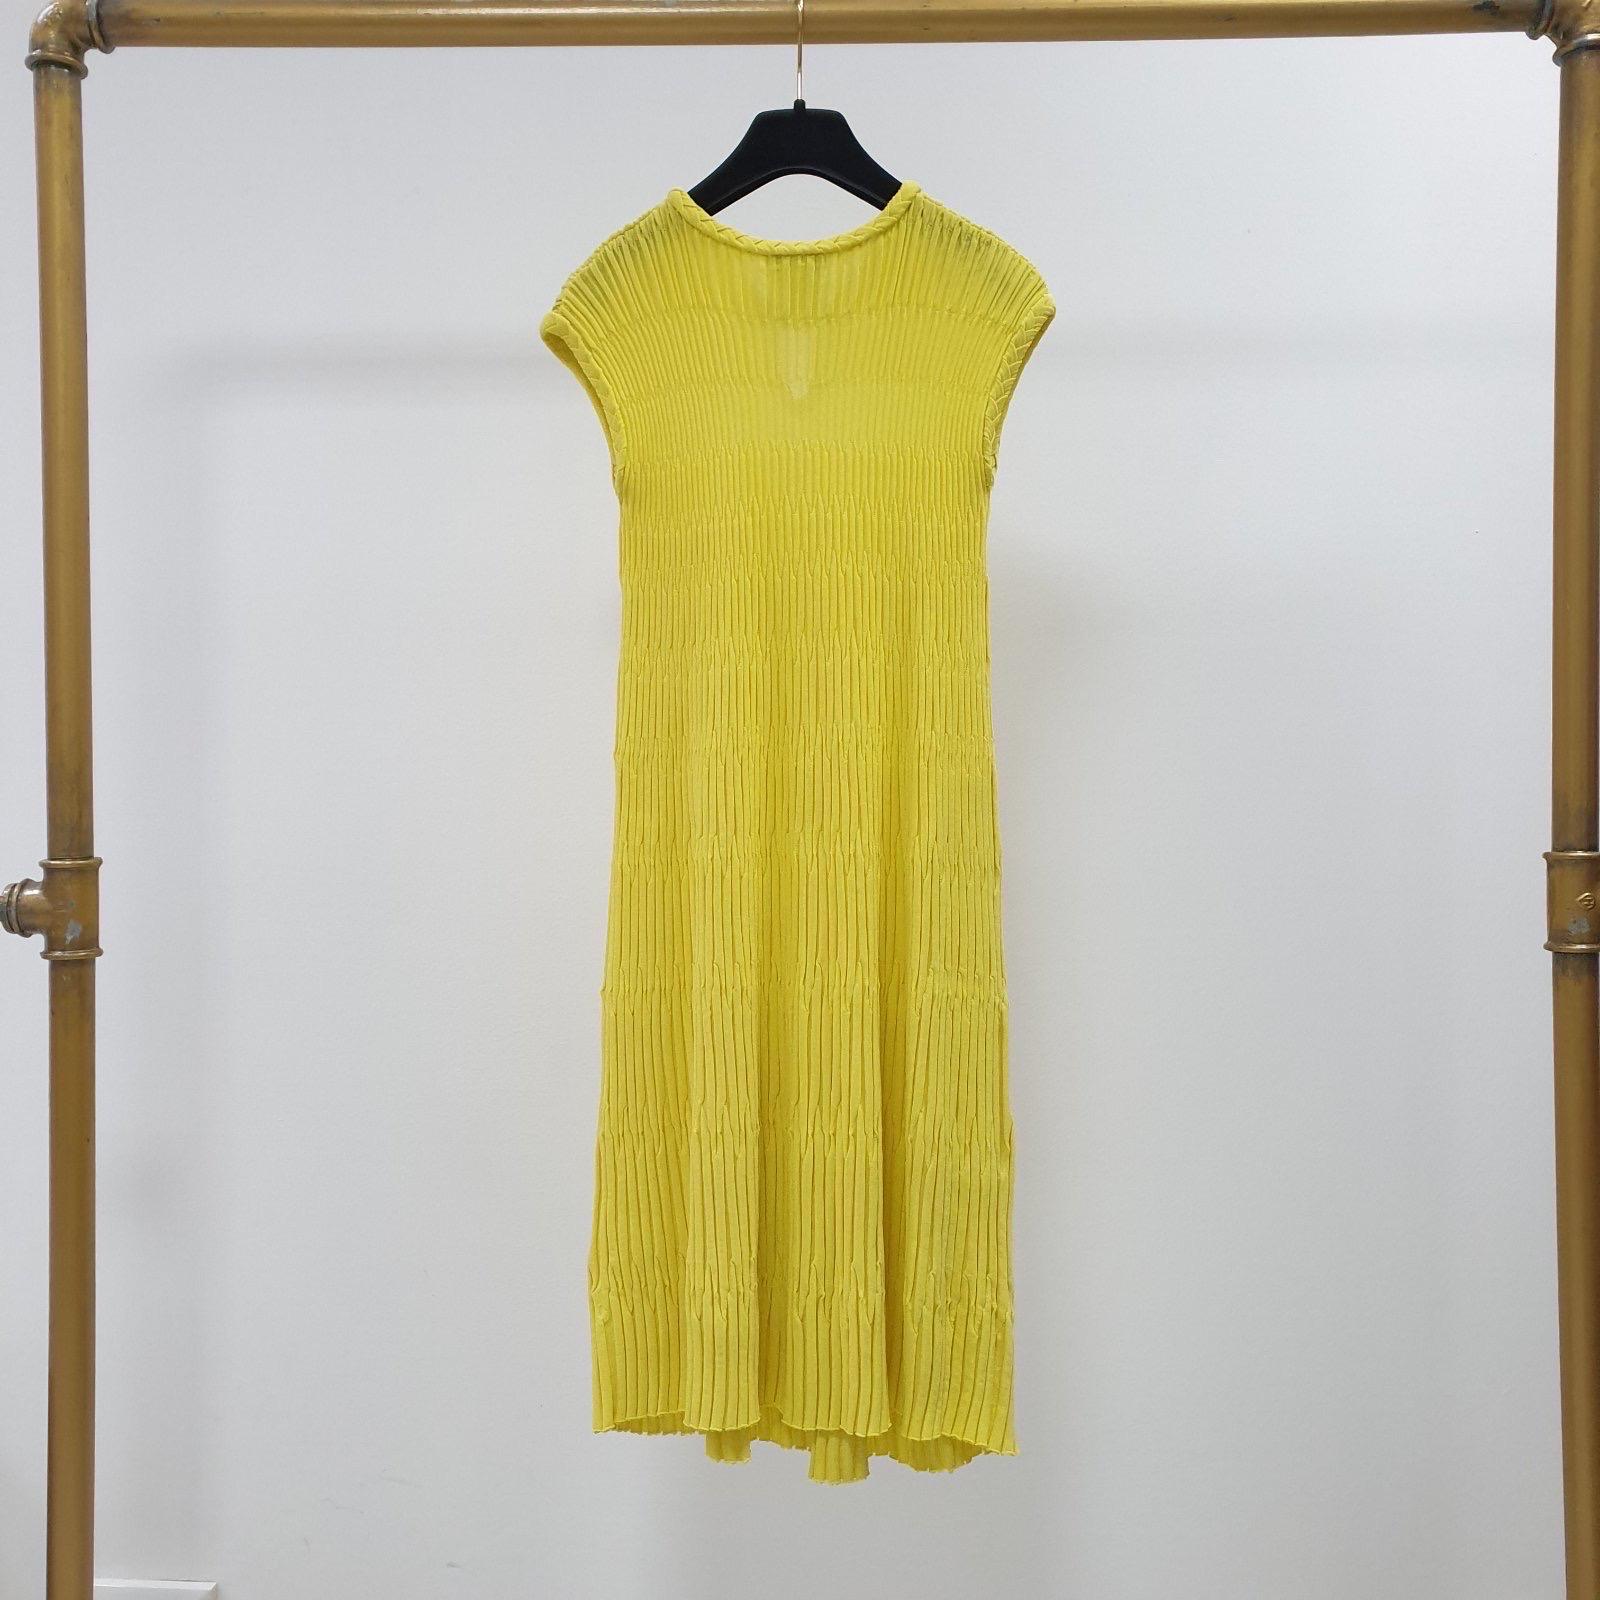 Authentic Chanel minimally divine in a bright yellow lurex knit, this sweater is a luxurious but practical investment that you can wear season after season. 

Beautiful Chanel 2 front buttons around the neckline.

Sz.36

Very good condition.